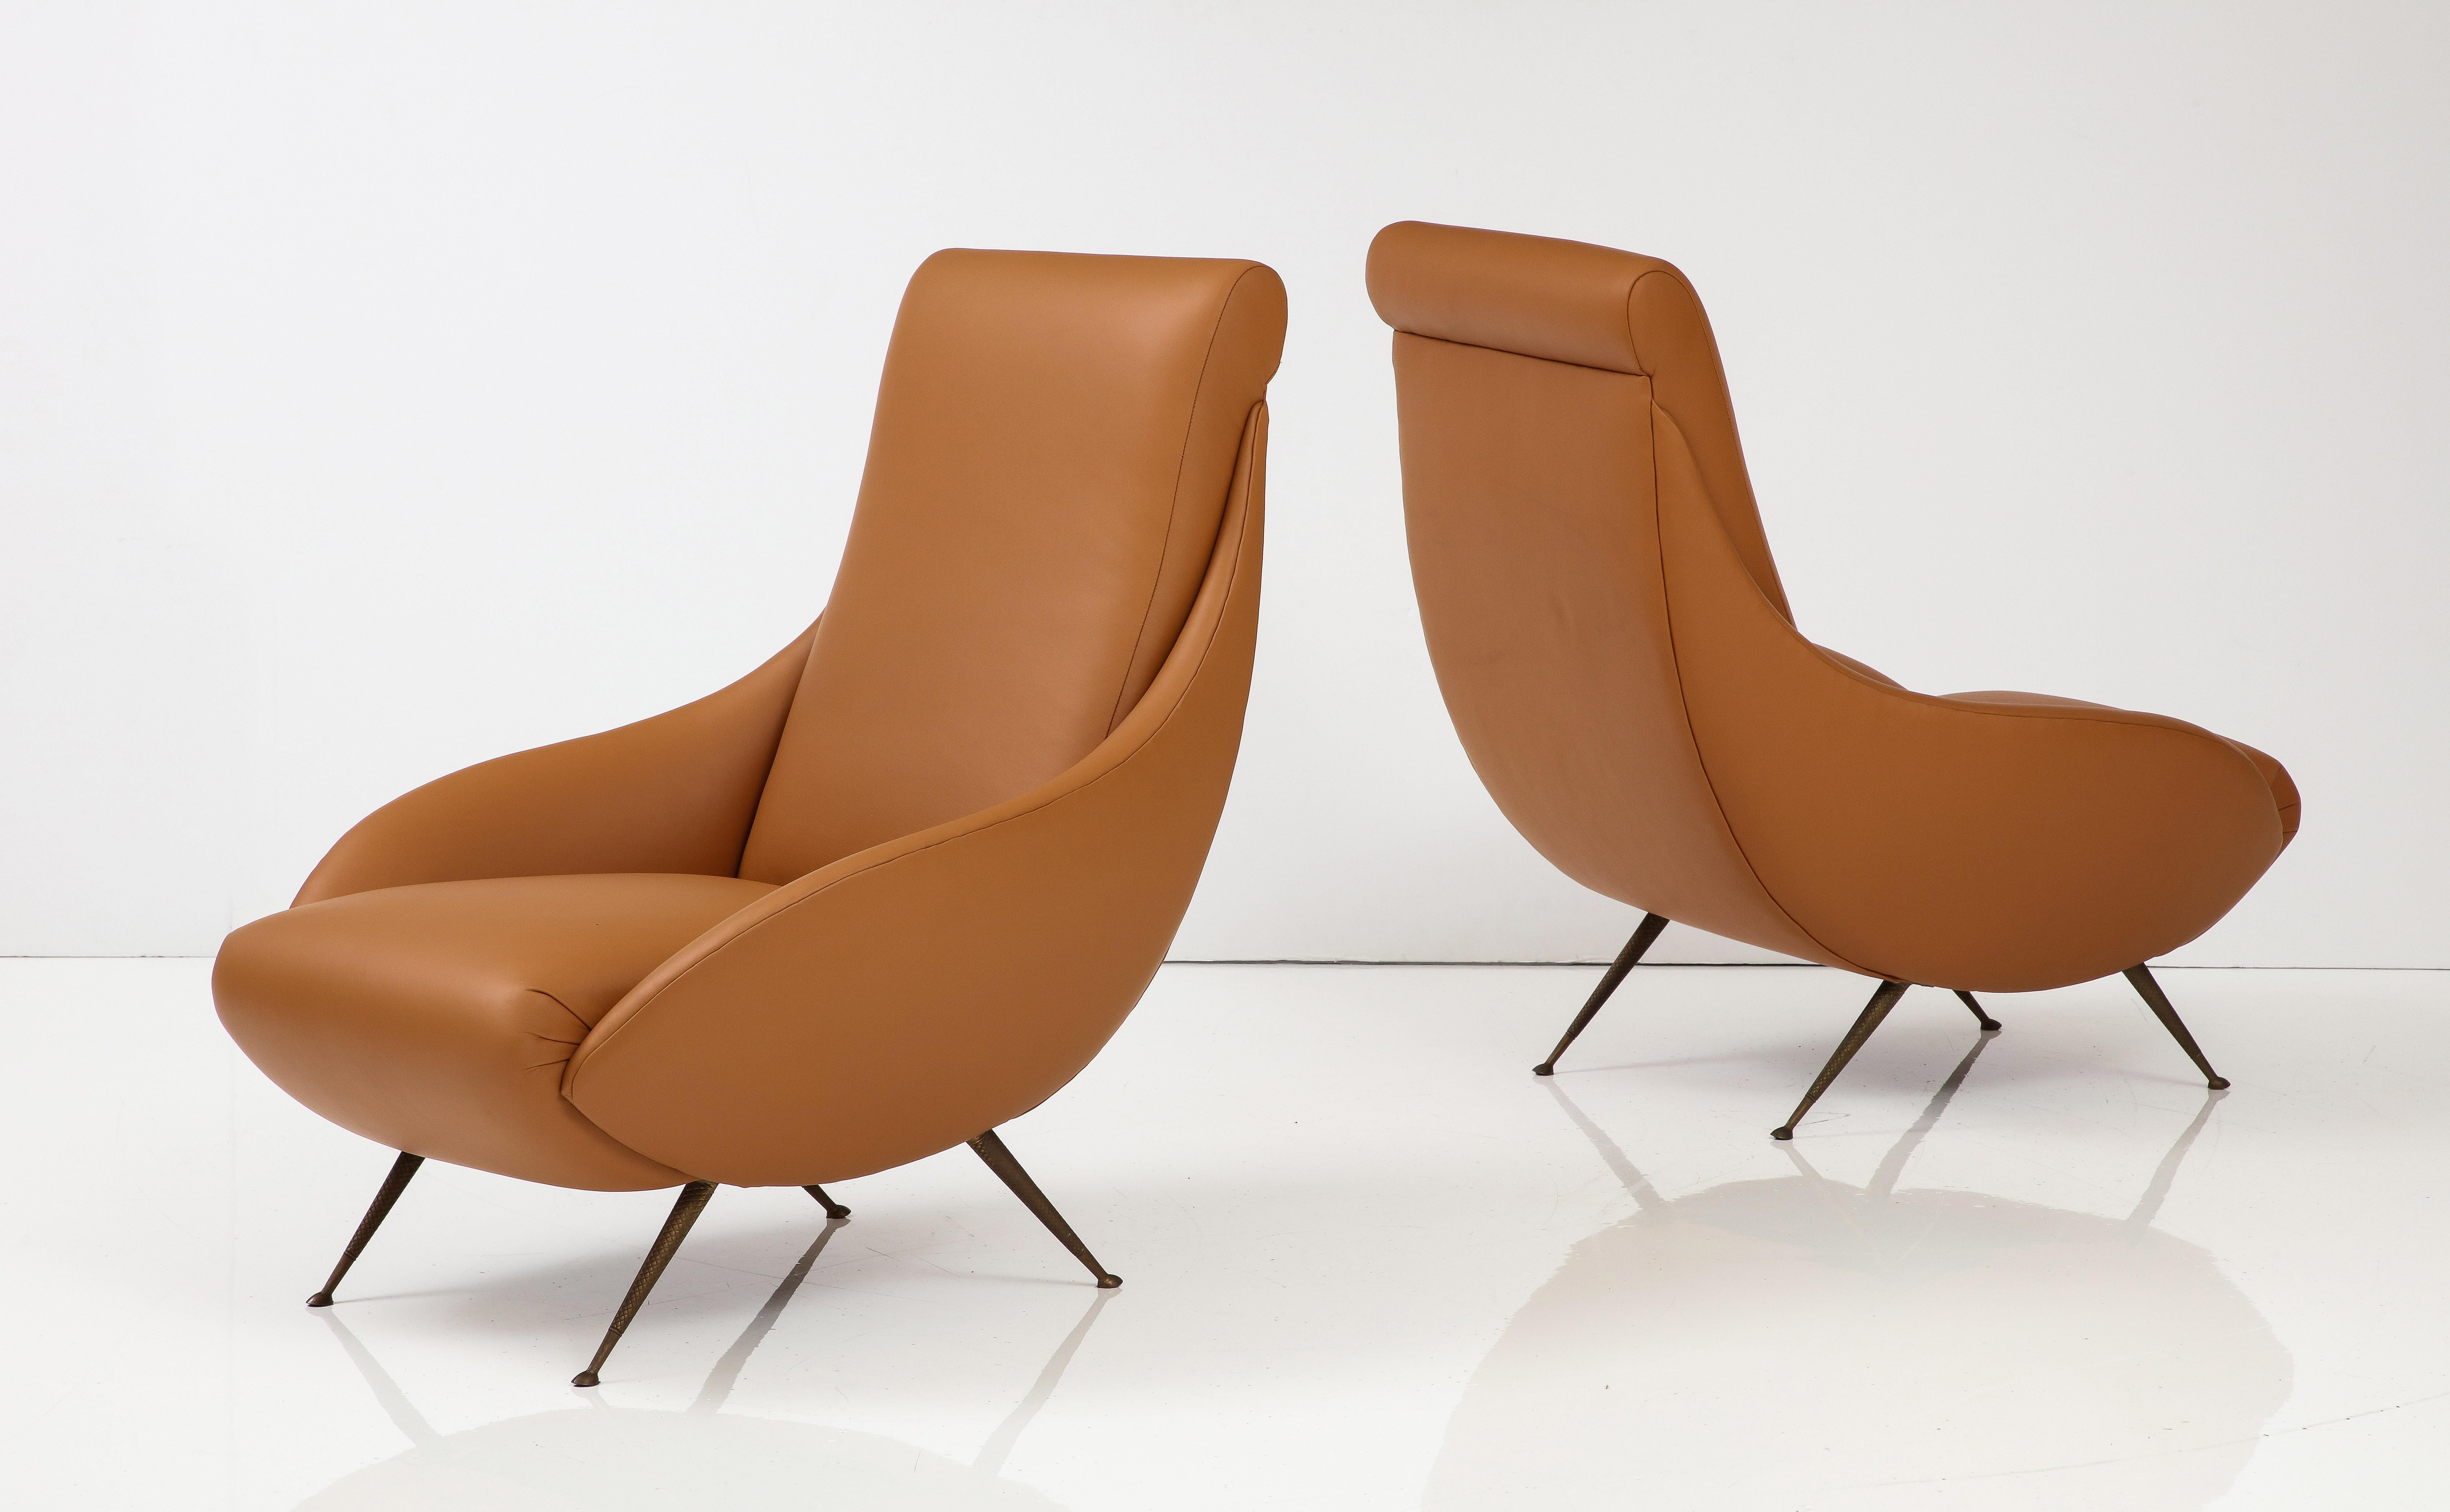 Pair of Italian Modernist Leather Lounge, Slipper Chairs , Italy, circa 1950 For Sale 1